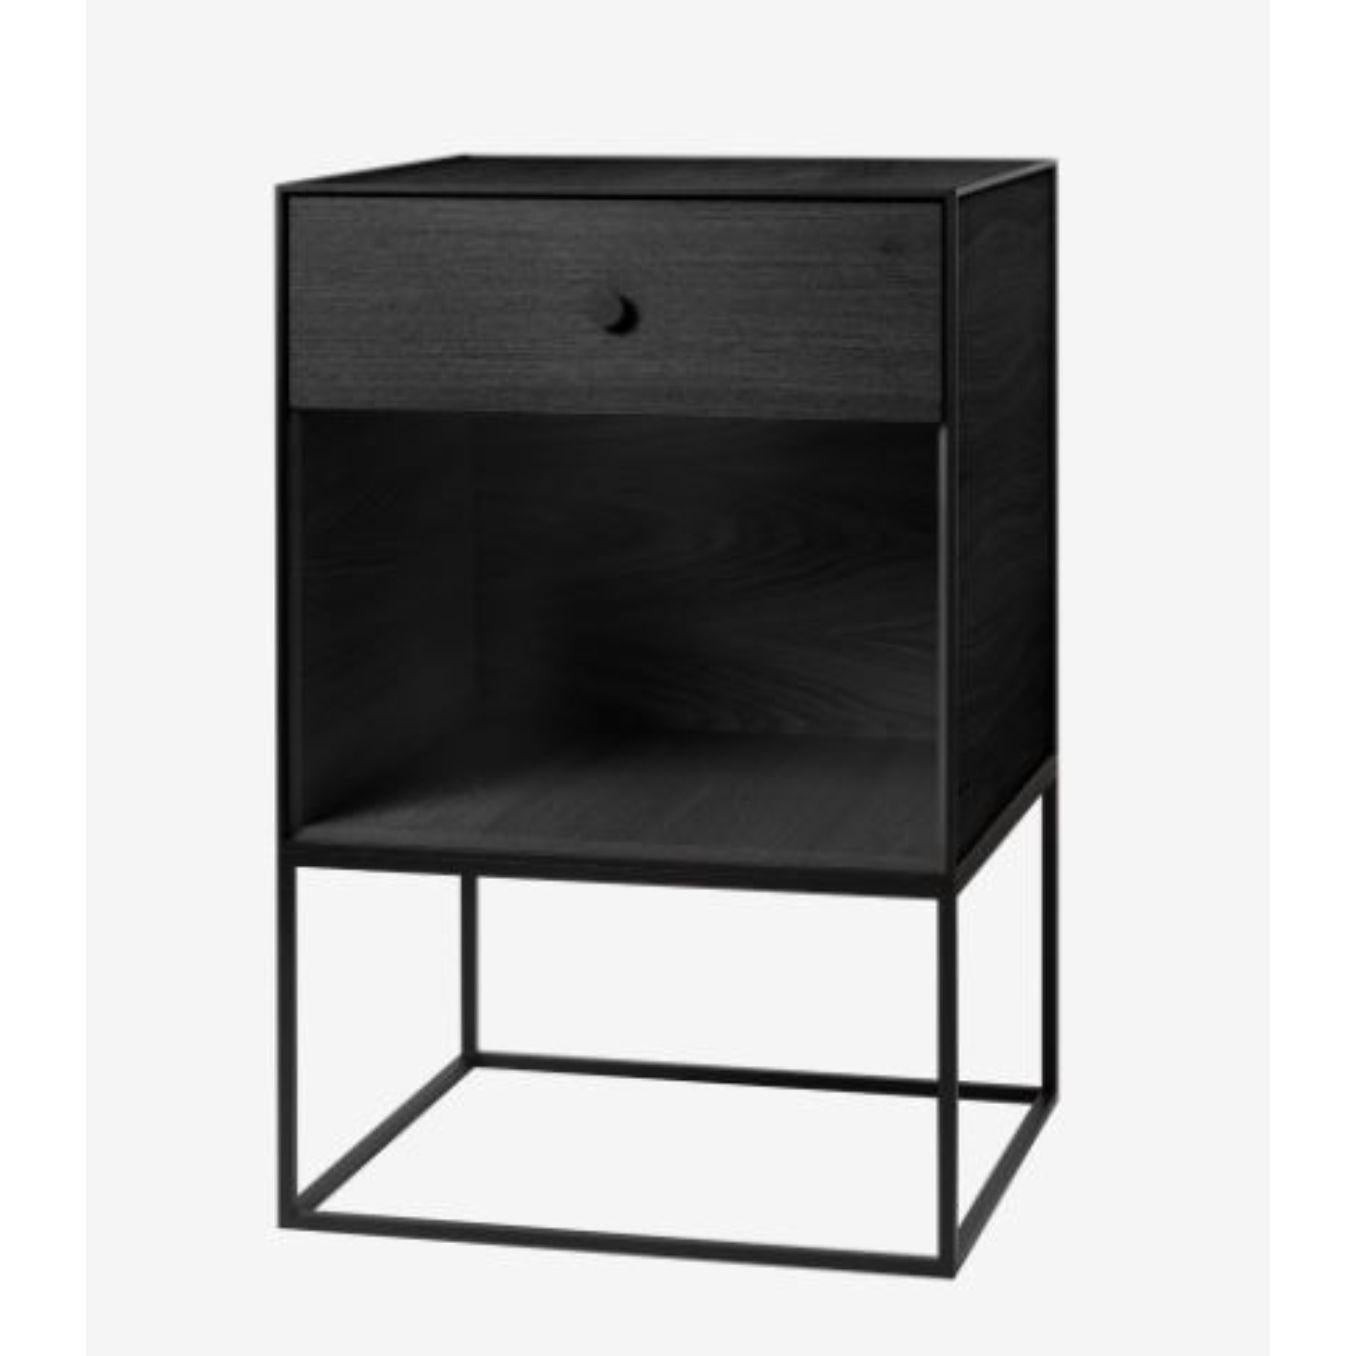 49 black ash frame sideboard with 1 drawer by Lassen
Dimensions: W 49 x D 42 x H 77 cm 
Materials: Finér, Melamin, Melamine, Metal, Veneer, Ash
Also available in different colors and dimensions. 
Weight: 15.50 Kg

By Lassen is a Danish design